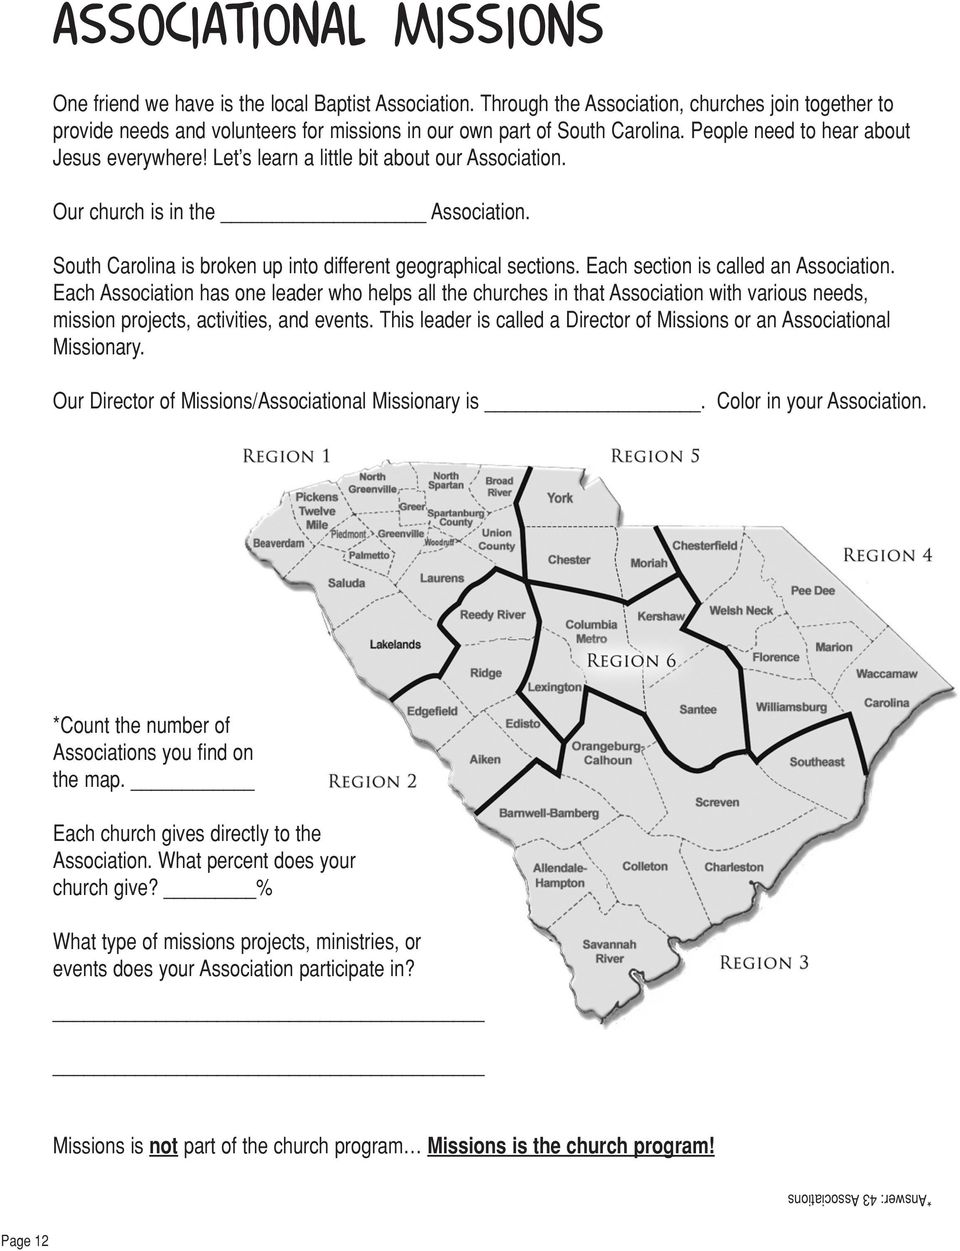 Let s learn a little bit about our Association. Our church is in the Association. South Carolina is broken up into different geographical sections. Each section is called an Association.